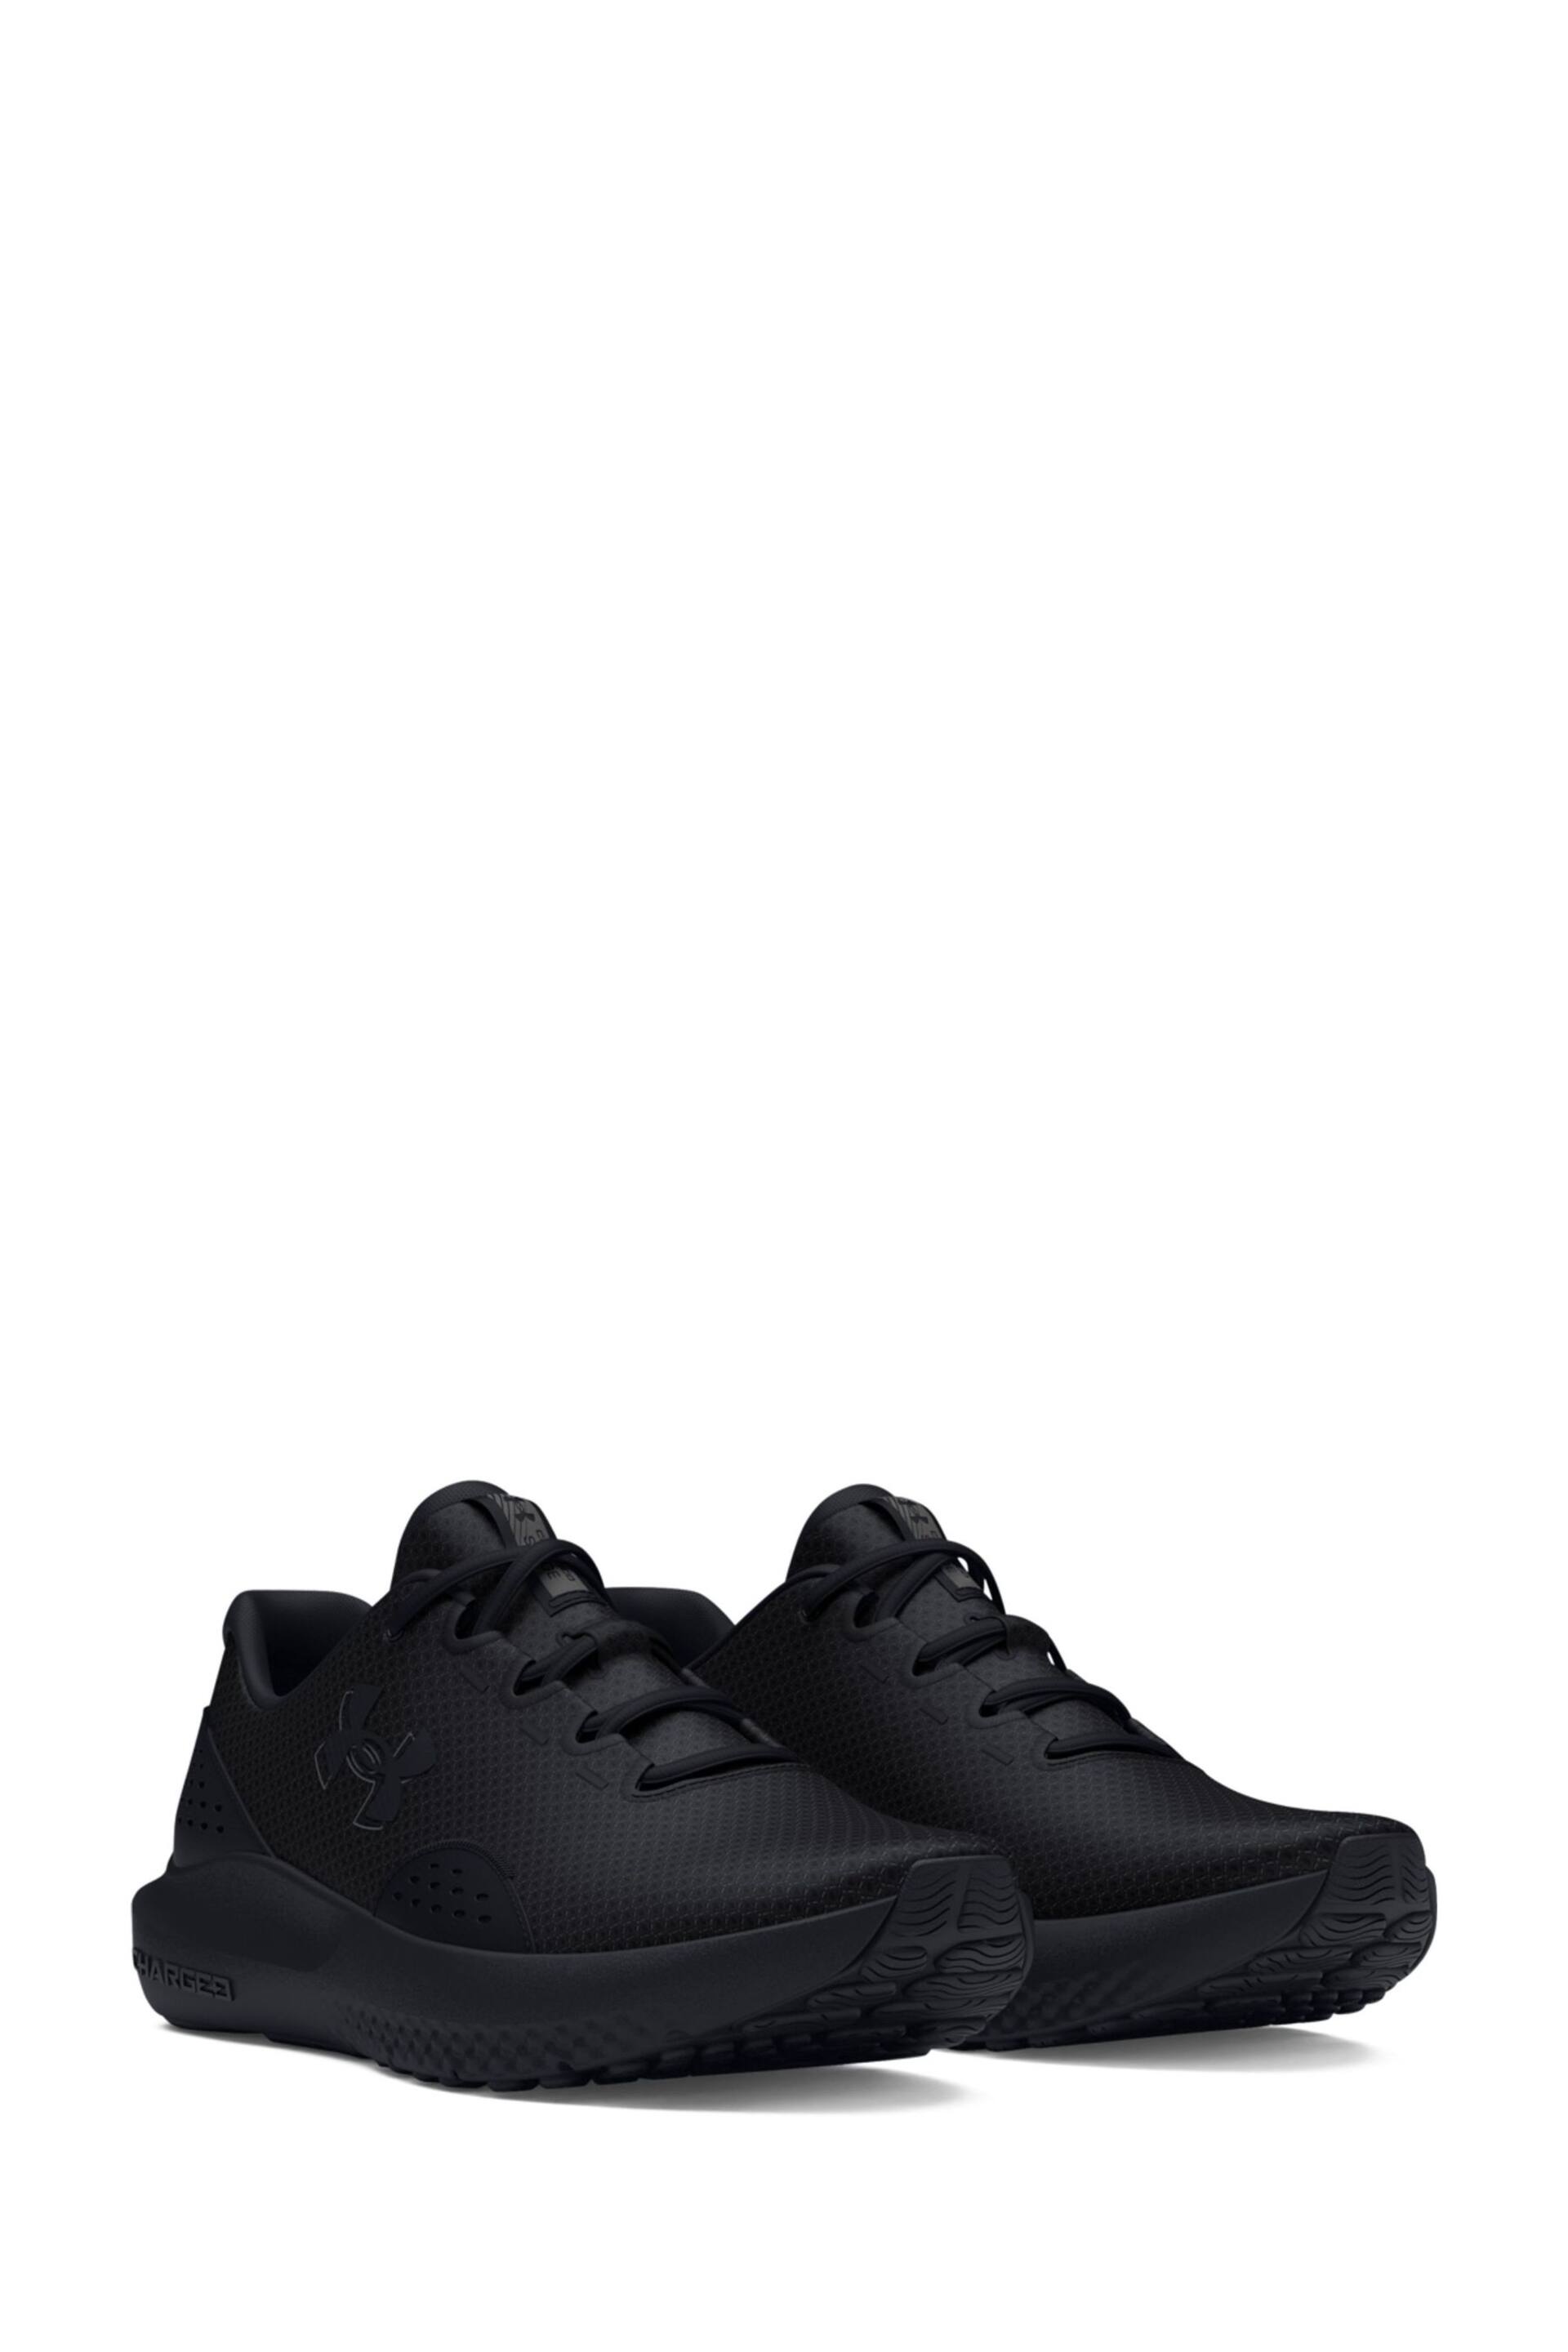 Under Armour Jet Black Surge 4 Trainers - Image 4 of 6